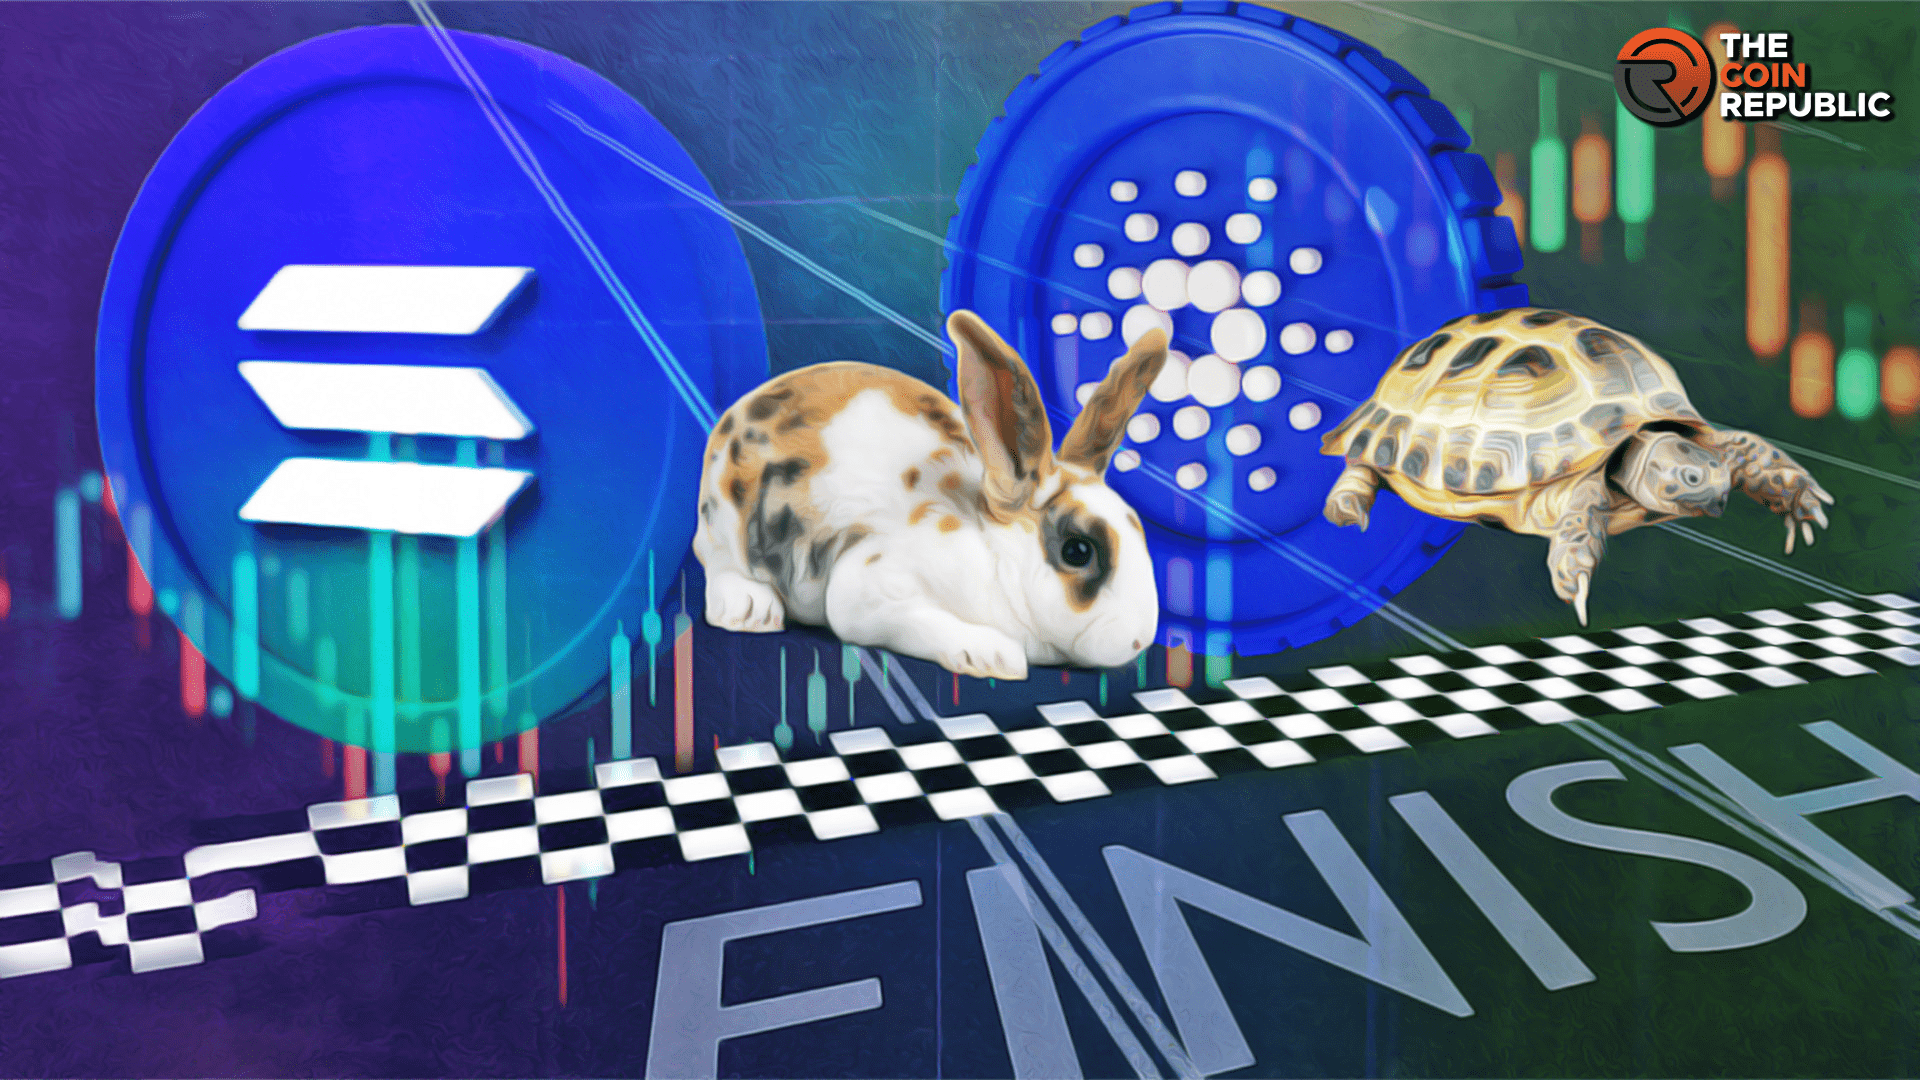 “Tortoise and Hare” Race B/w Solana and Cardano; Who’s Winning?